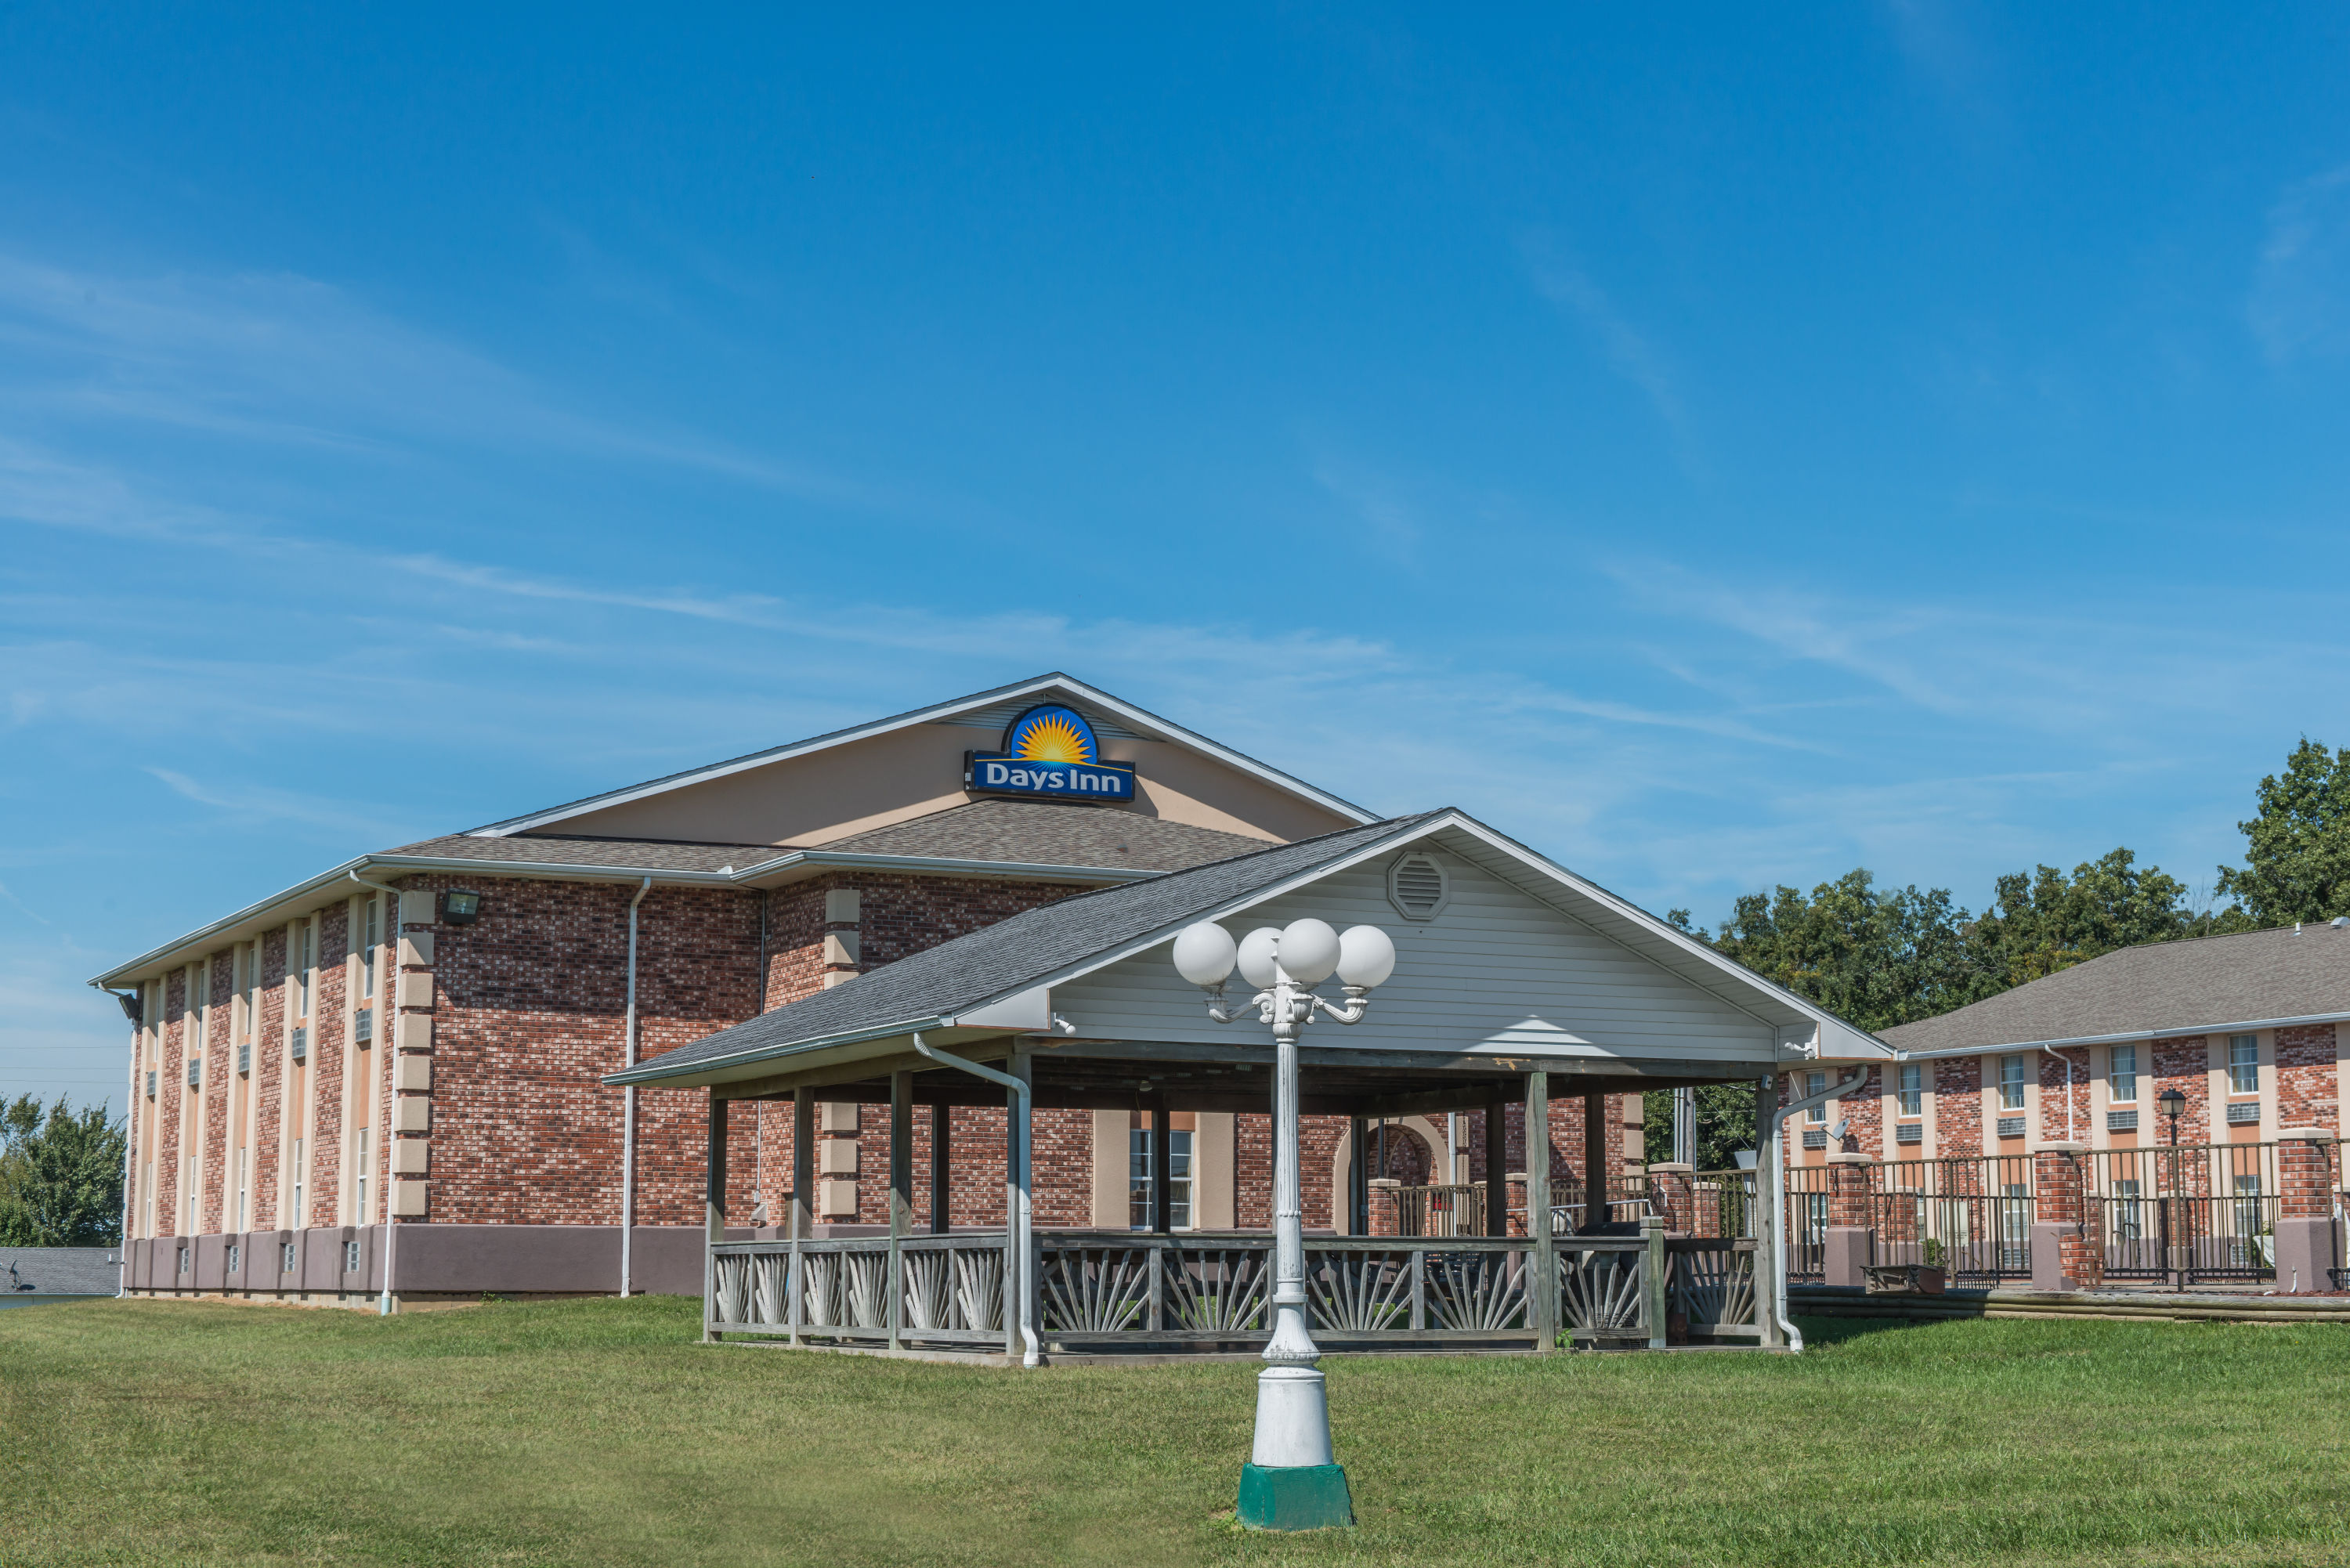 Days Inn by Wyndham Perryville Perryville, MO Hotels